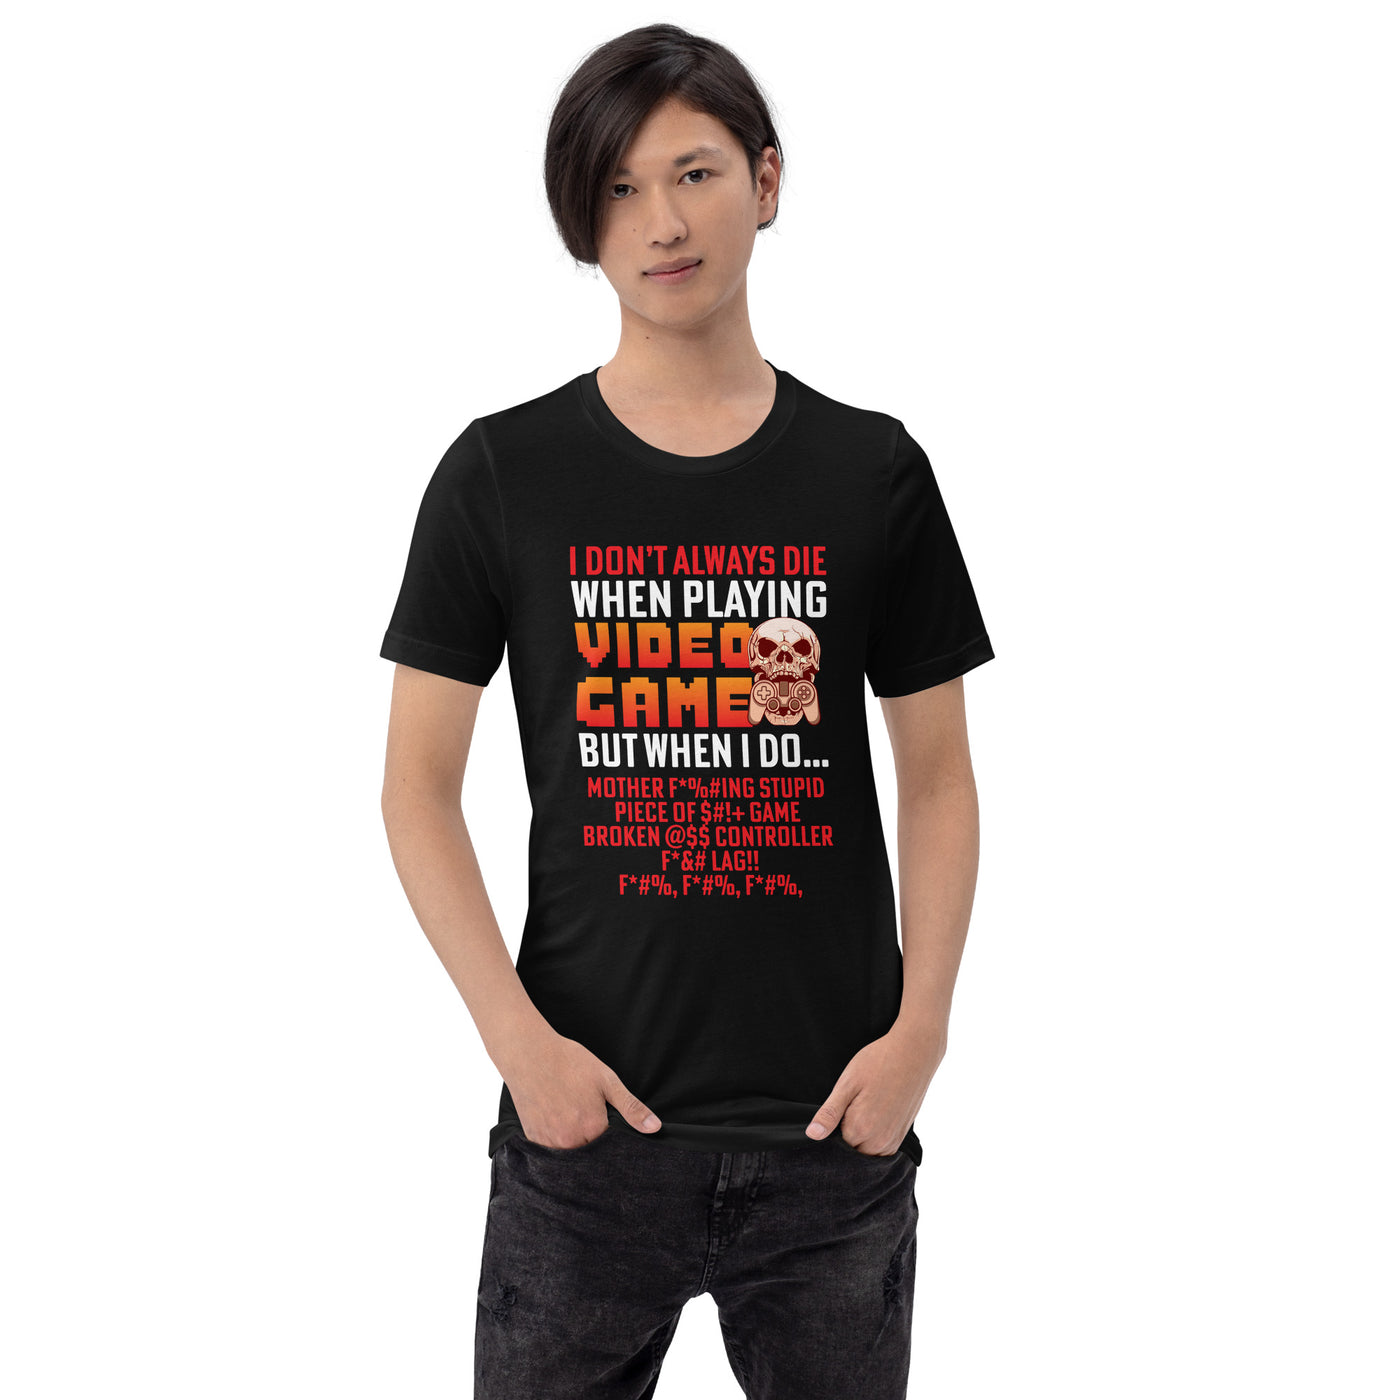 I don't always die when playing Video Games, when I do - Unisex t-shirt